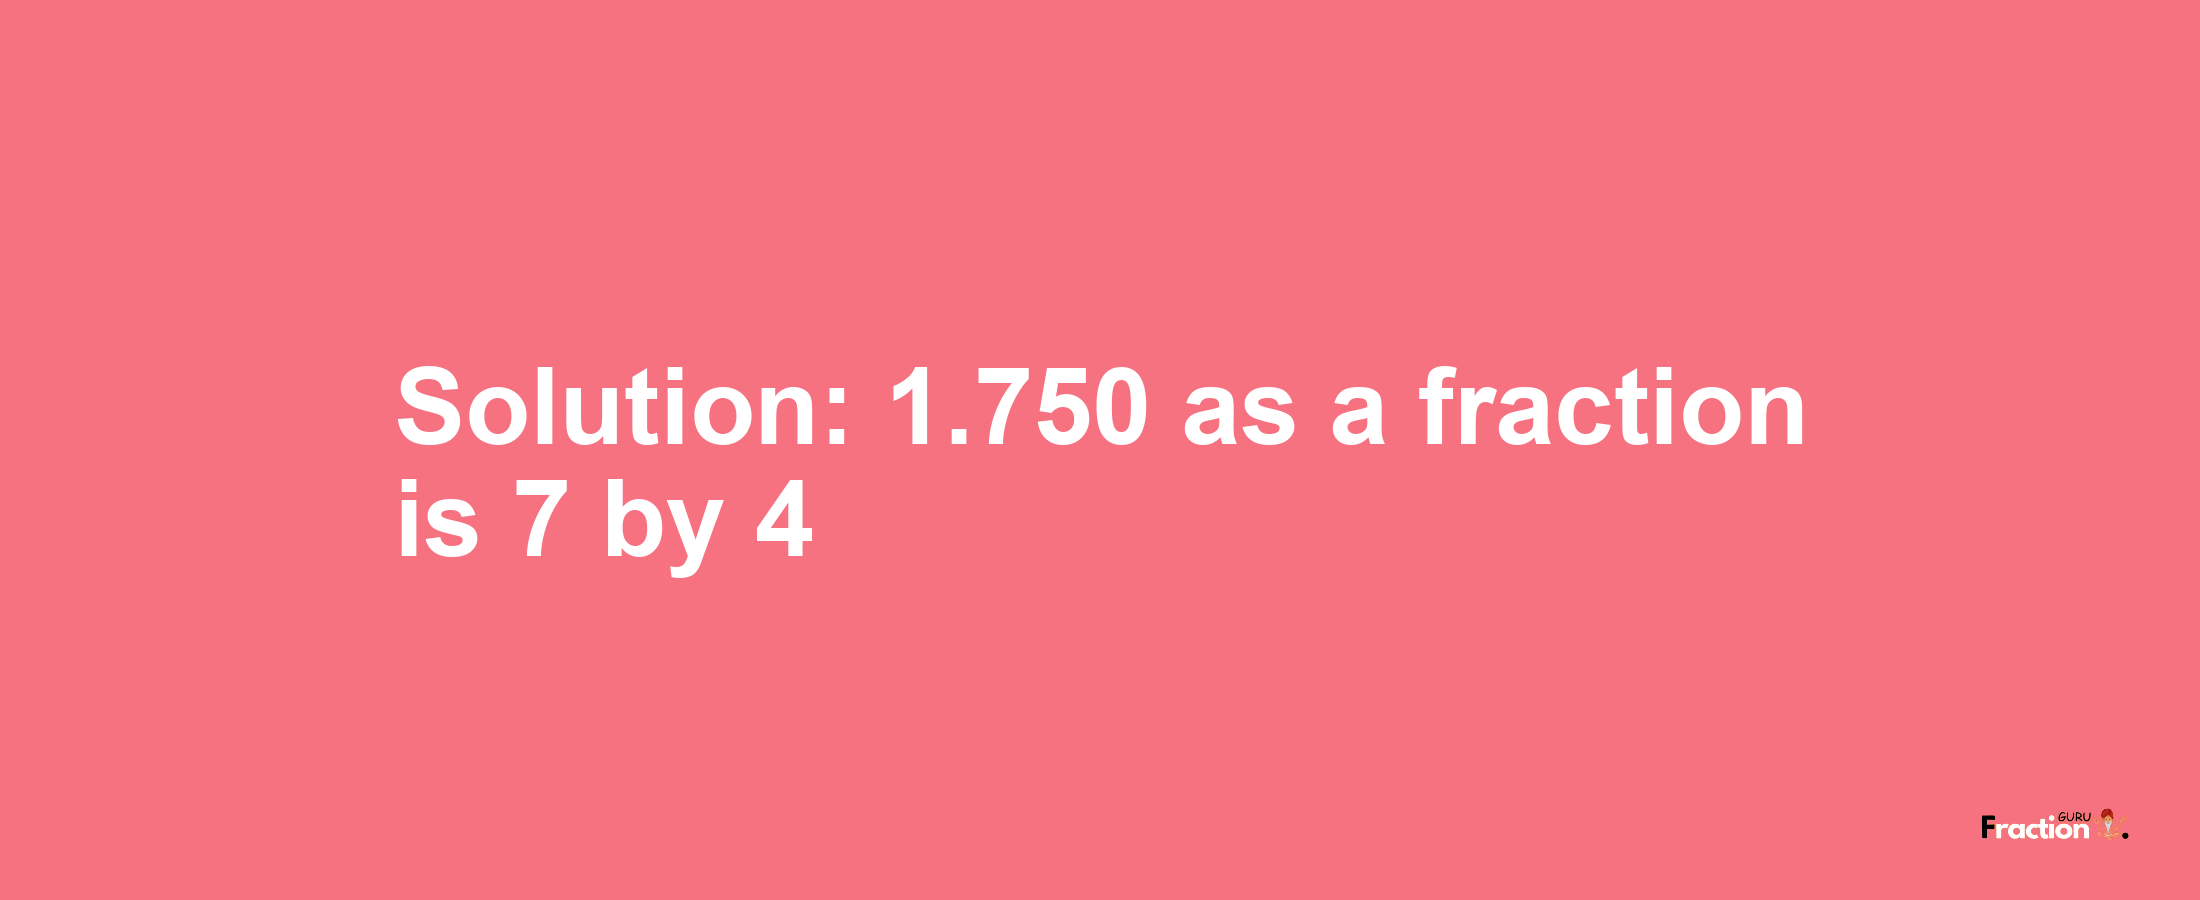 Solution:1.750 as a fraction is 7/4